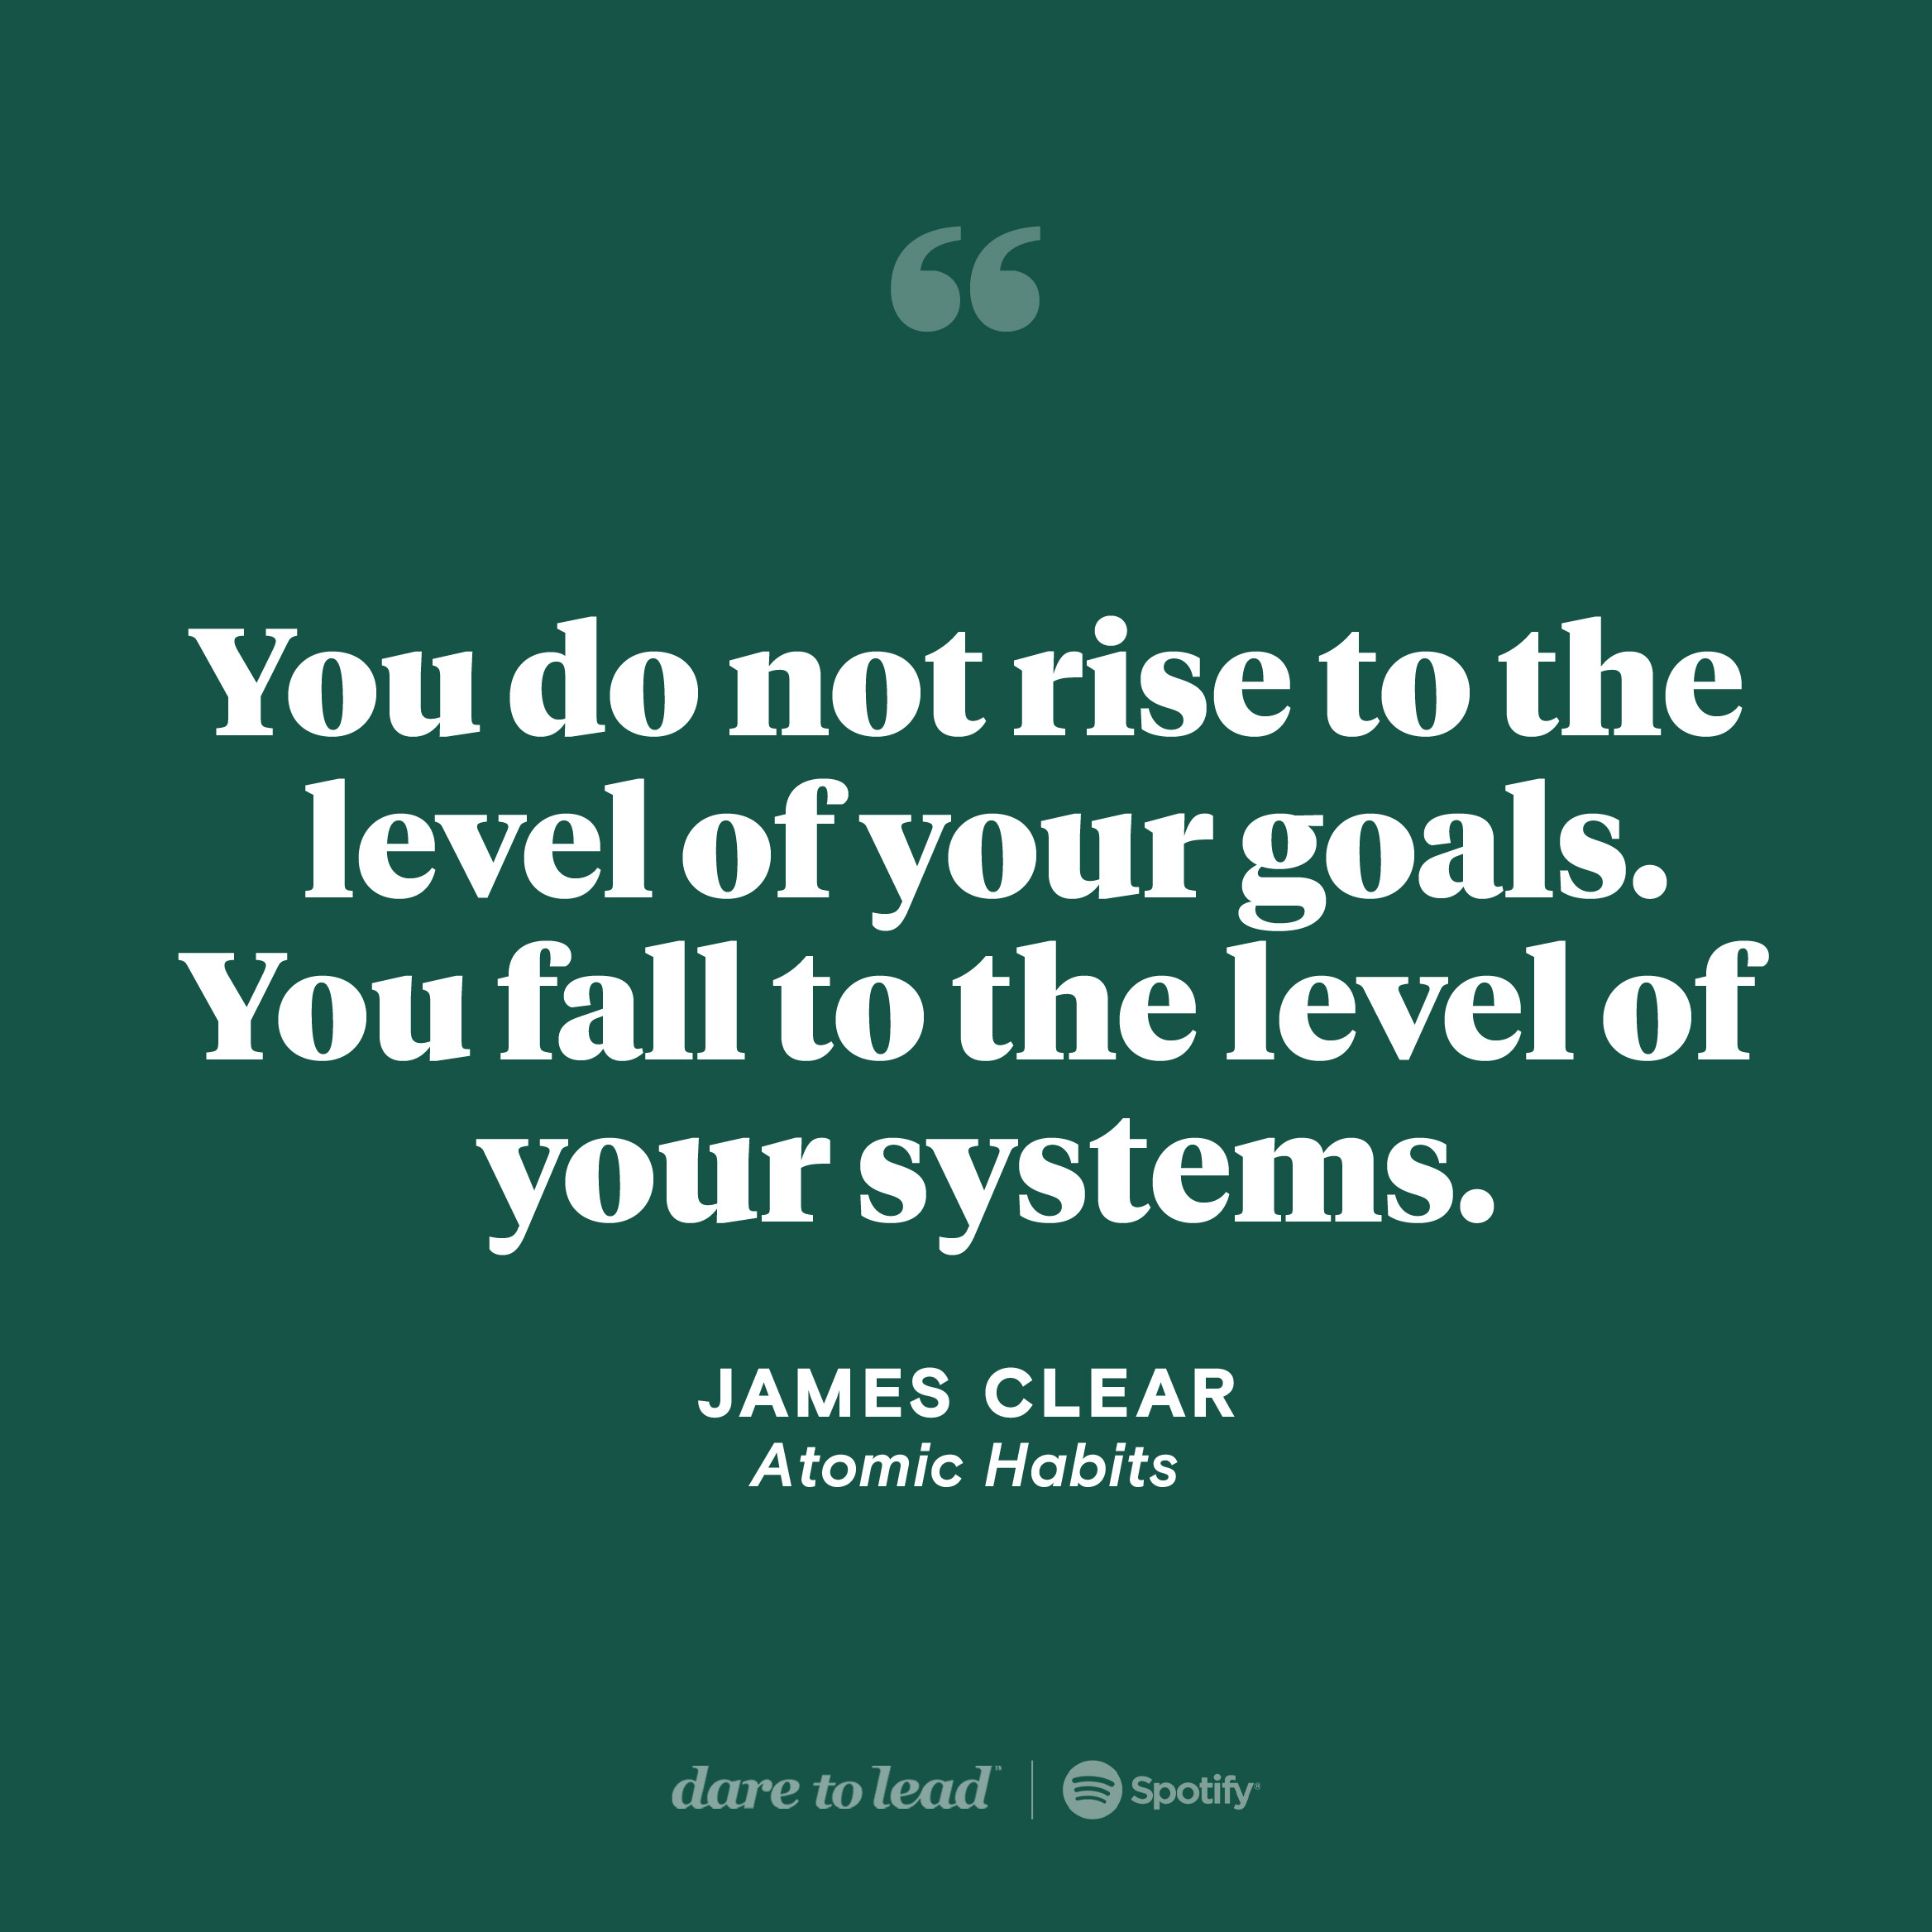 A quote from James Clear, author of Atomic Habits: You do not rise to the level of your goals. You fall to the level of your systems.